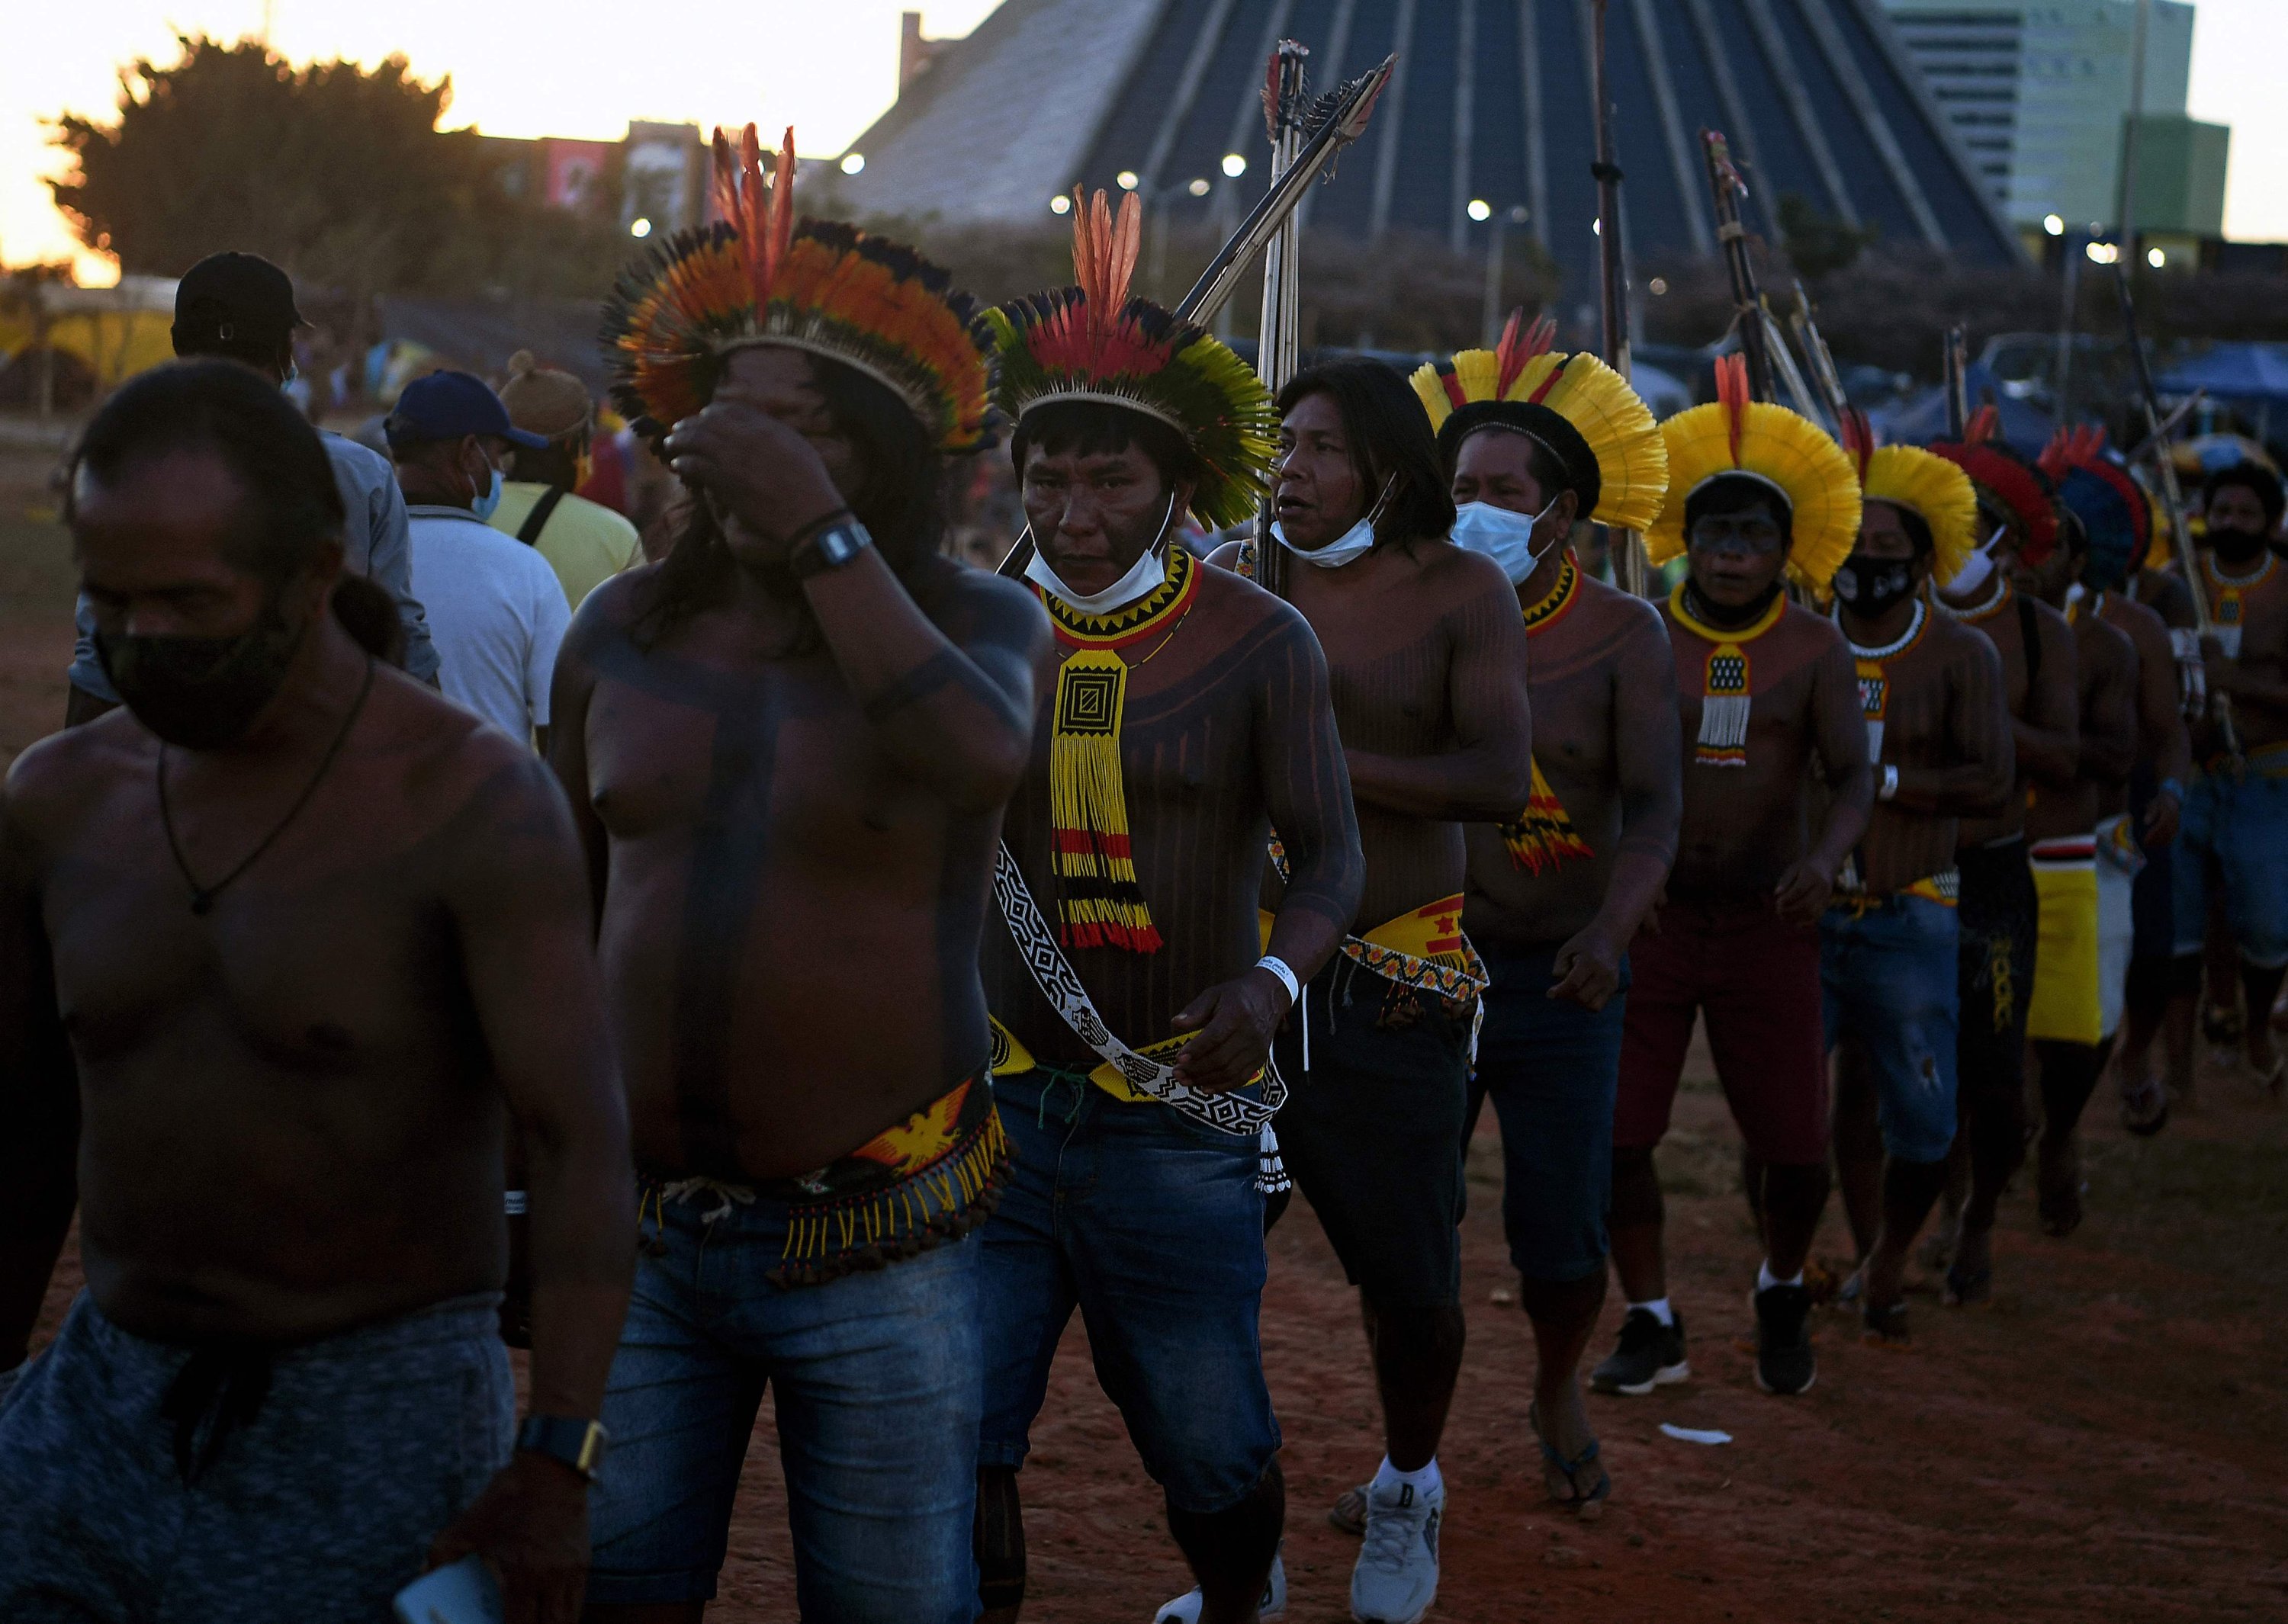 Members of the Kayapo tribe are seen at a protest camp in Brasilia, Brazil, Aug. 22, 2021. (AFP Photo)